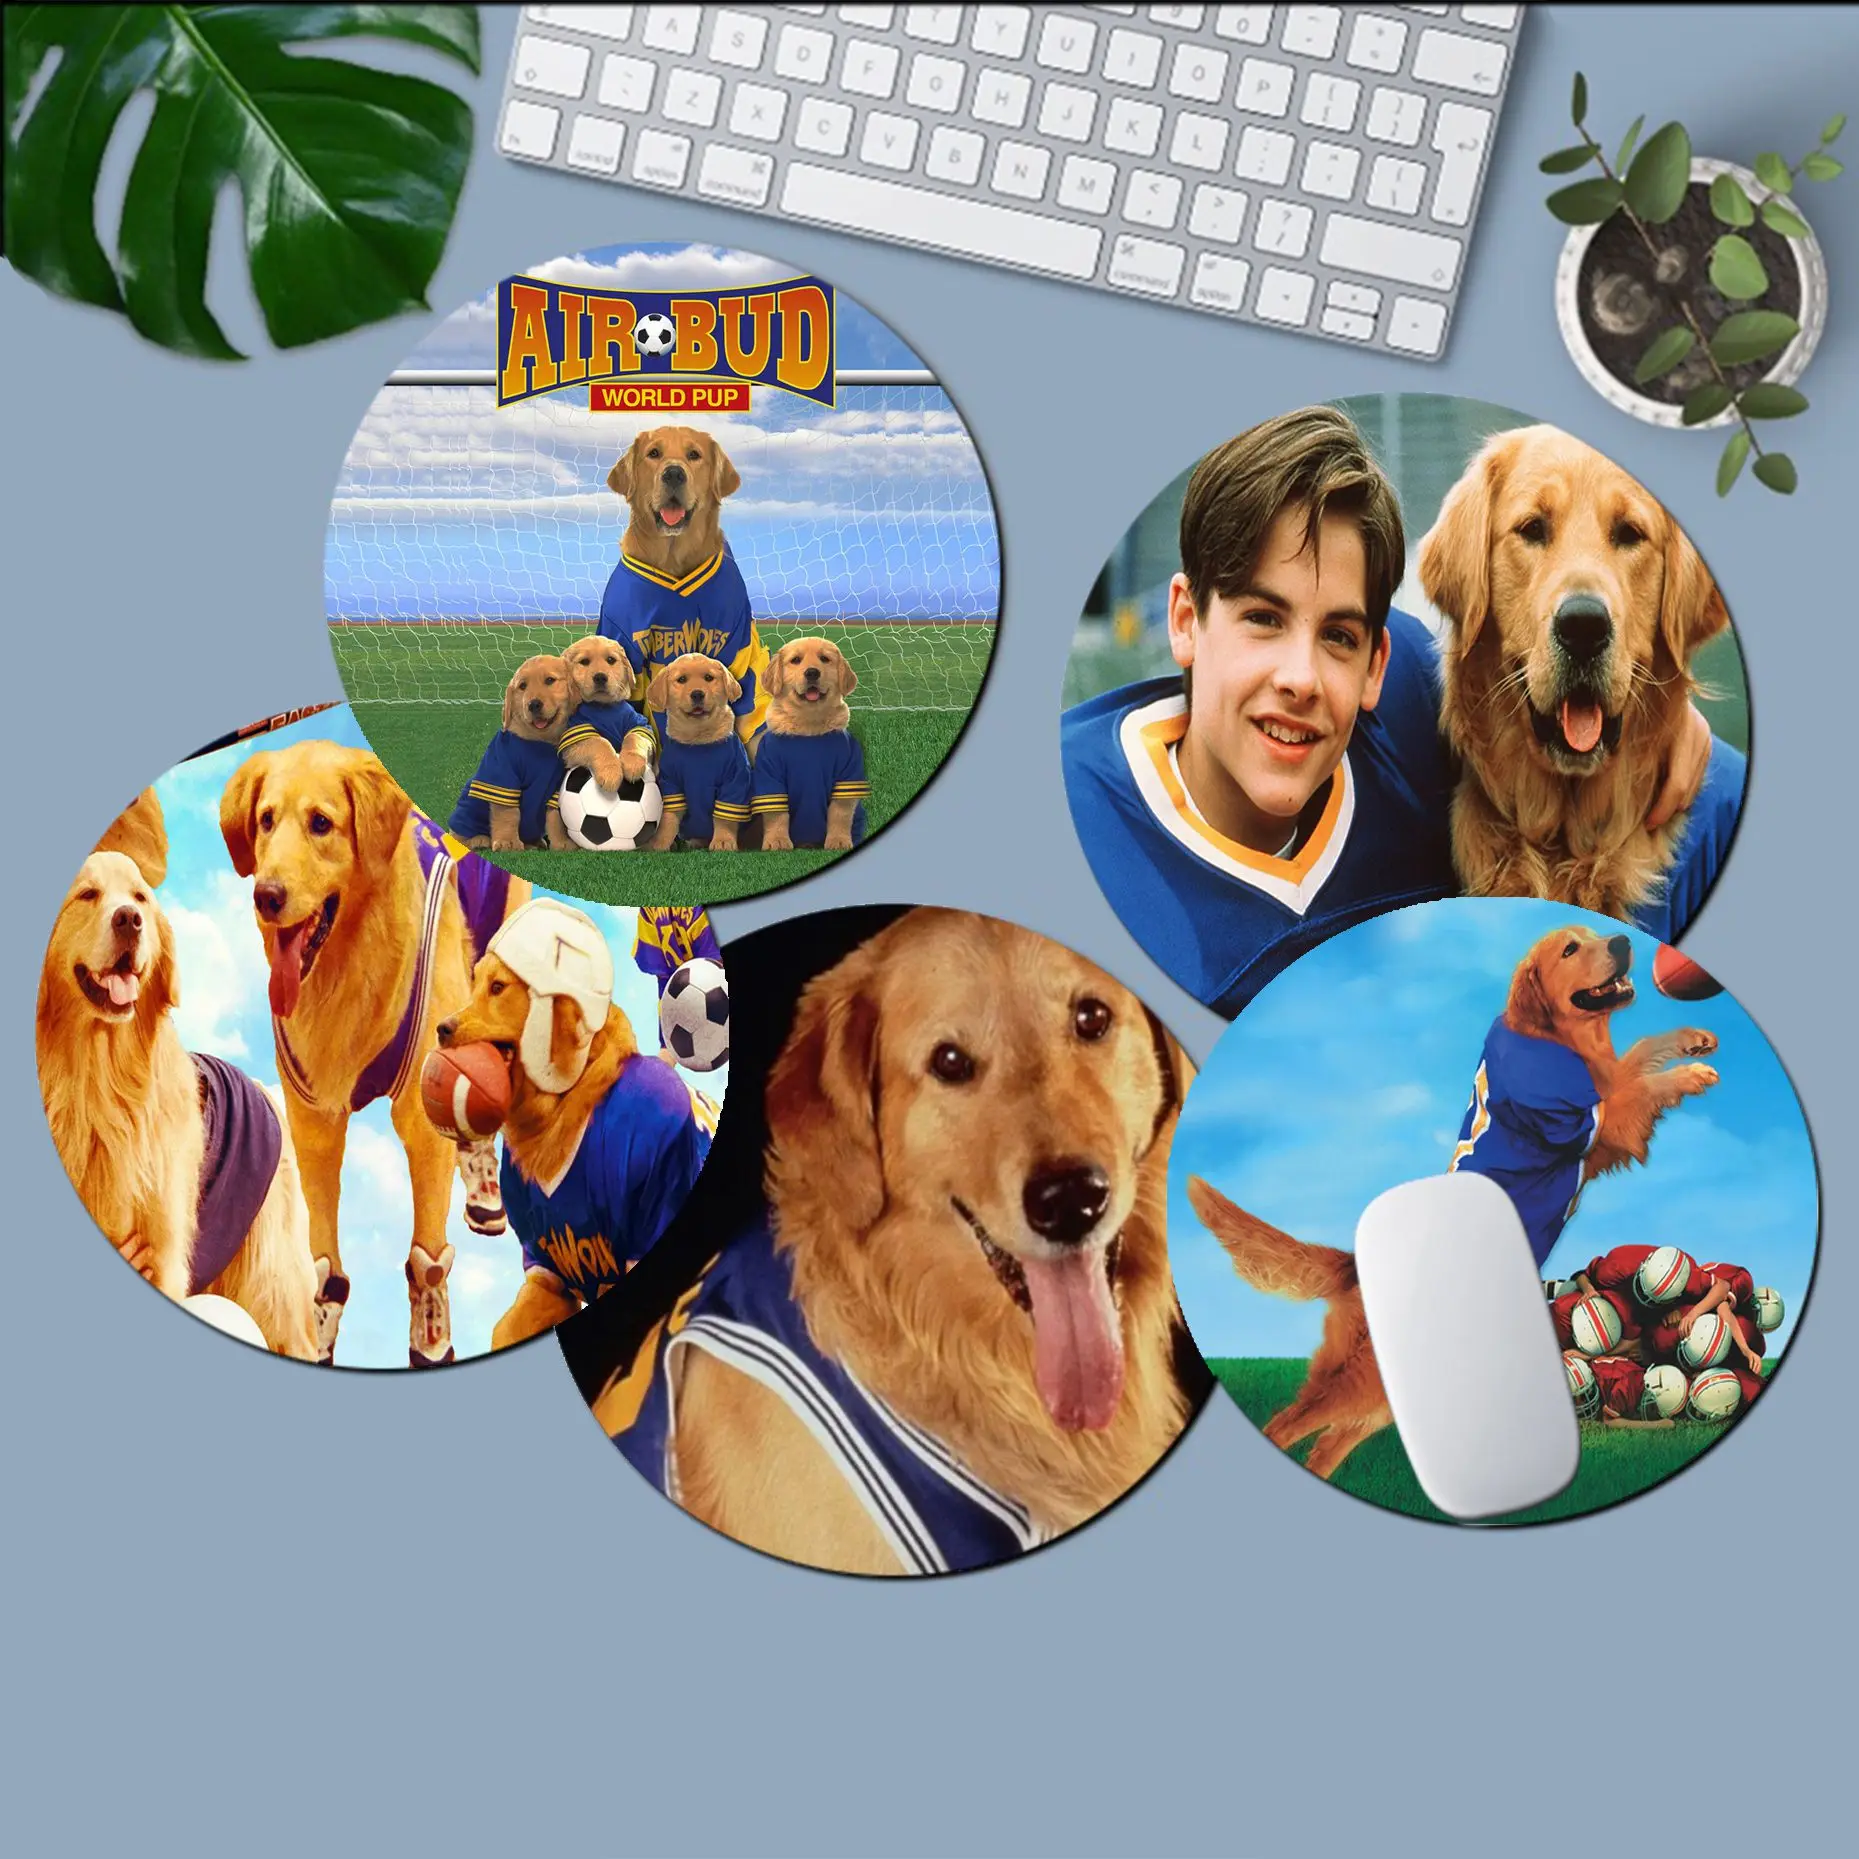 

Your Own Mats Disney Air Bud Unique Desktop Pad Game Lockedge Mousepad gaming Mousepad Rug For PC Laptop Notebook